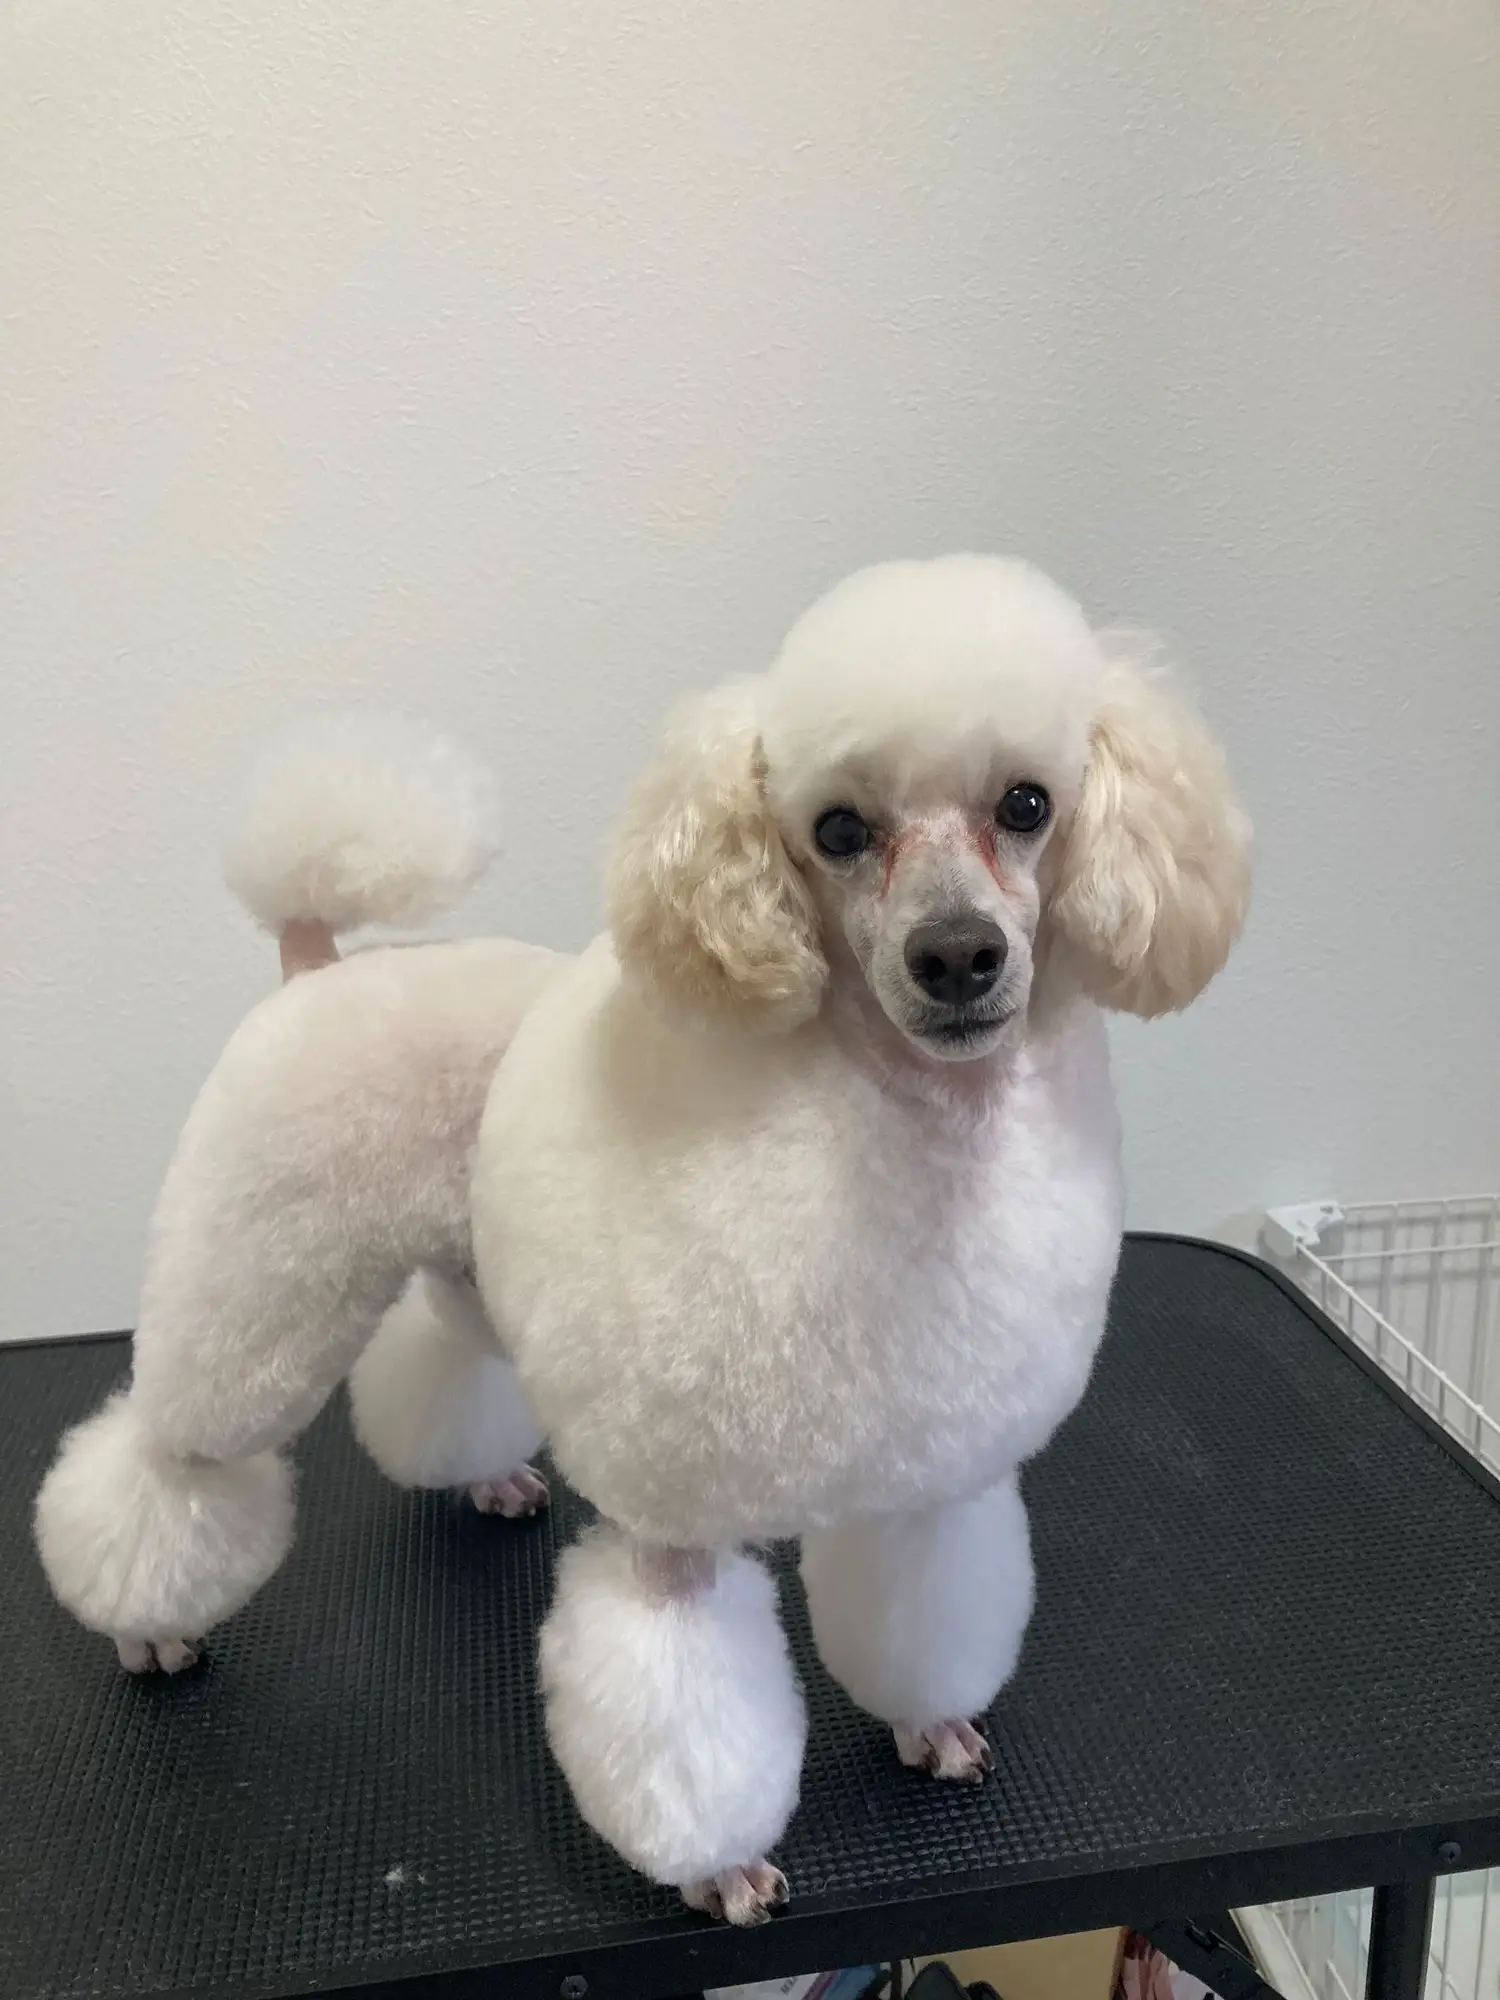 Poodle Cut | Gallery posted by noa | Lemon8